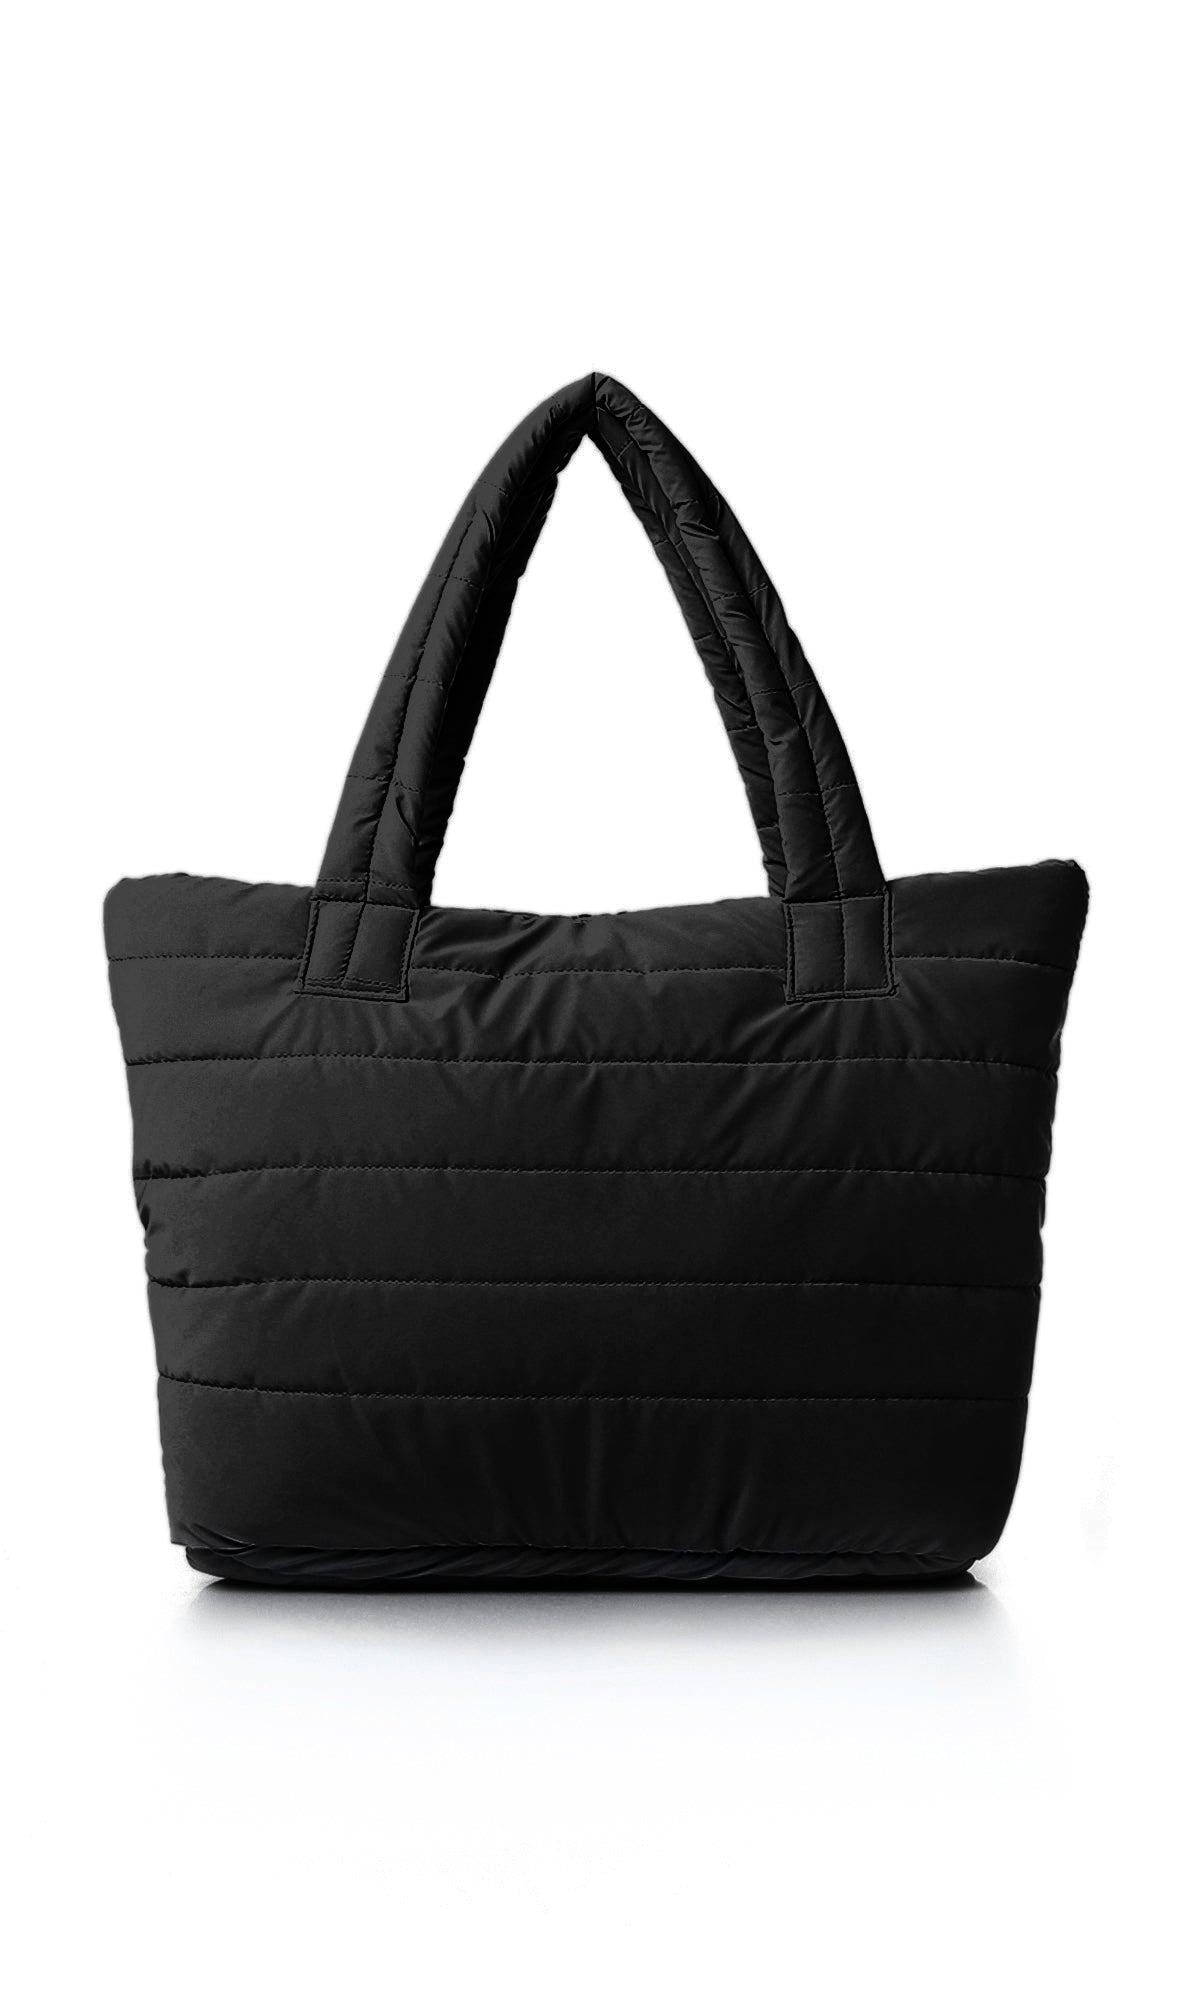 O181882 Zipped Casual Black Quilted Hand-Bag